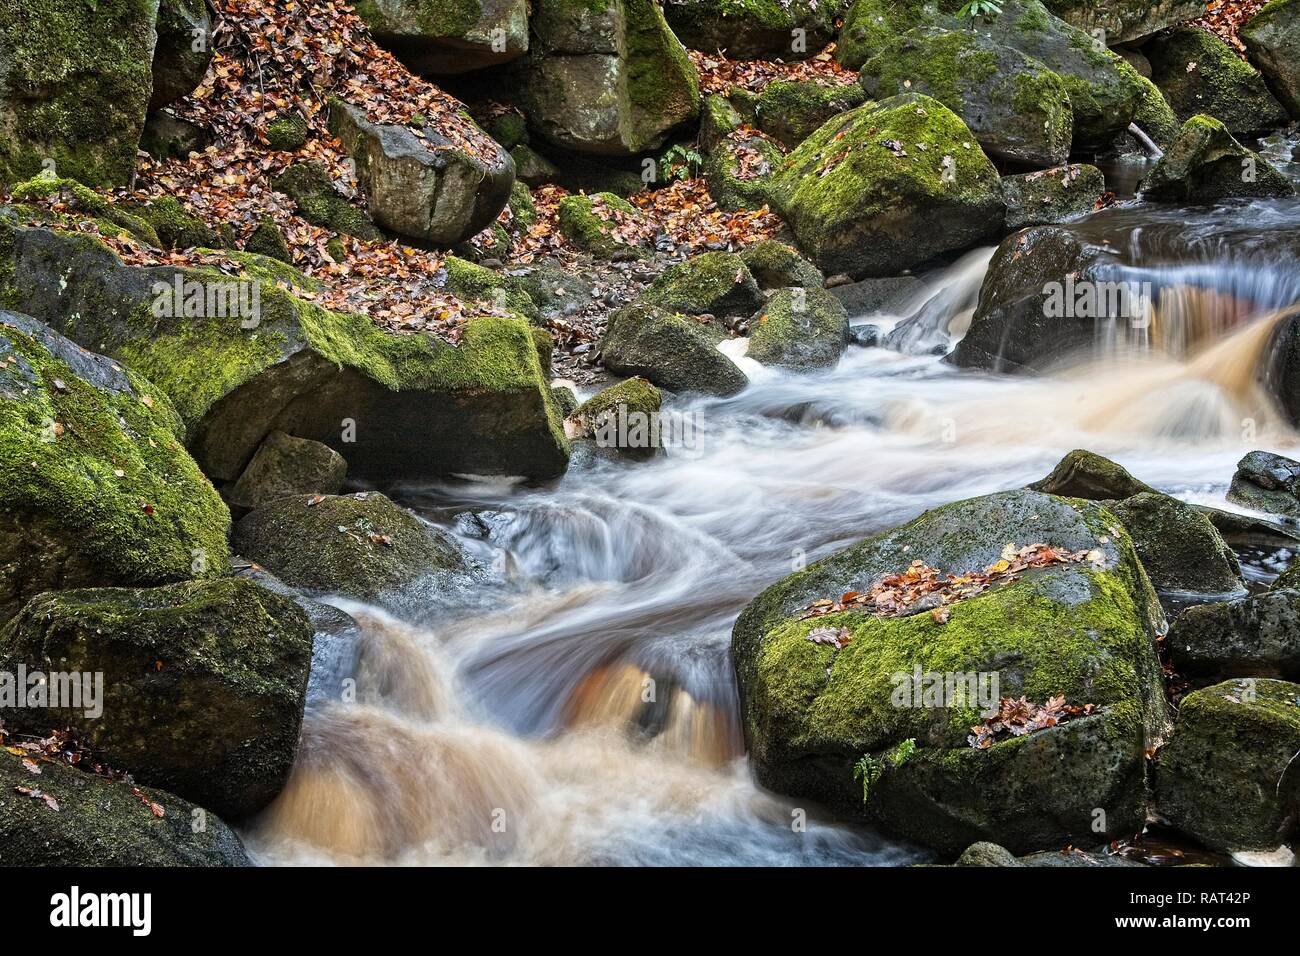 A fast flowing river in the Peak District National Park, UK. The erosive force of Burbage Brook through Padley Gorge is seen in its turbulant flow. Stock Photo